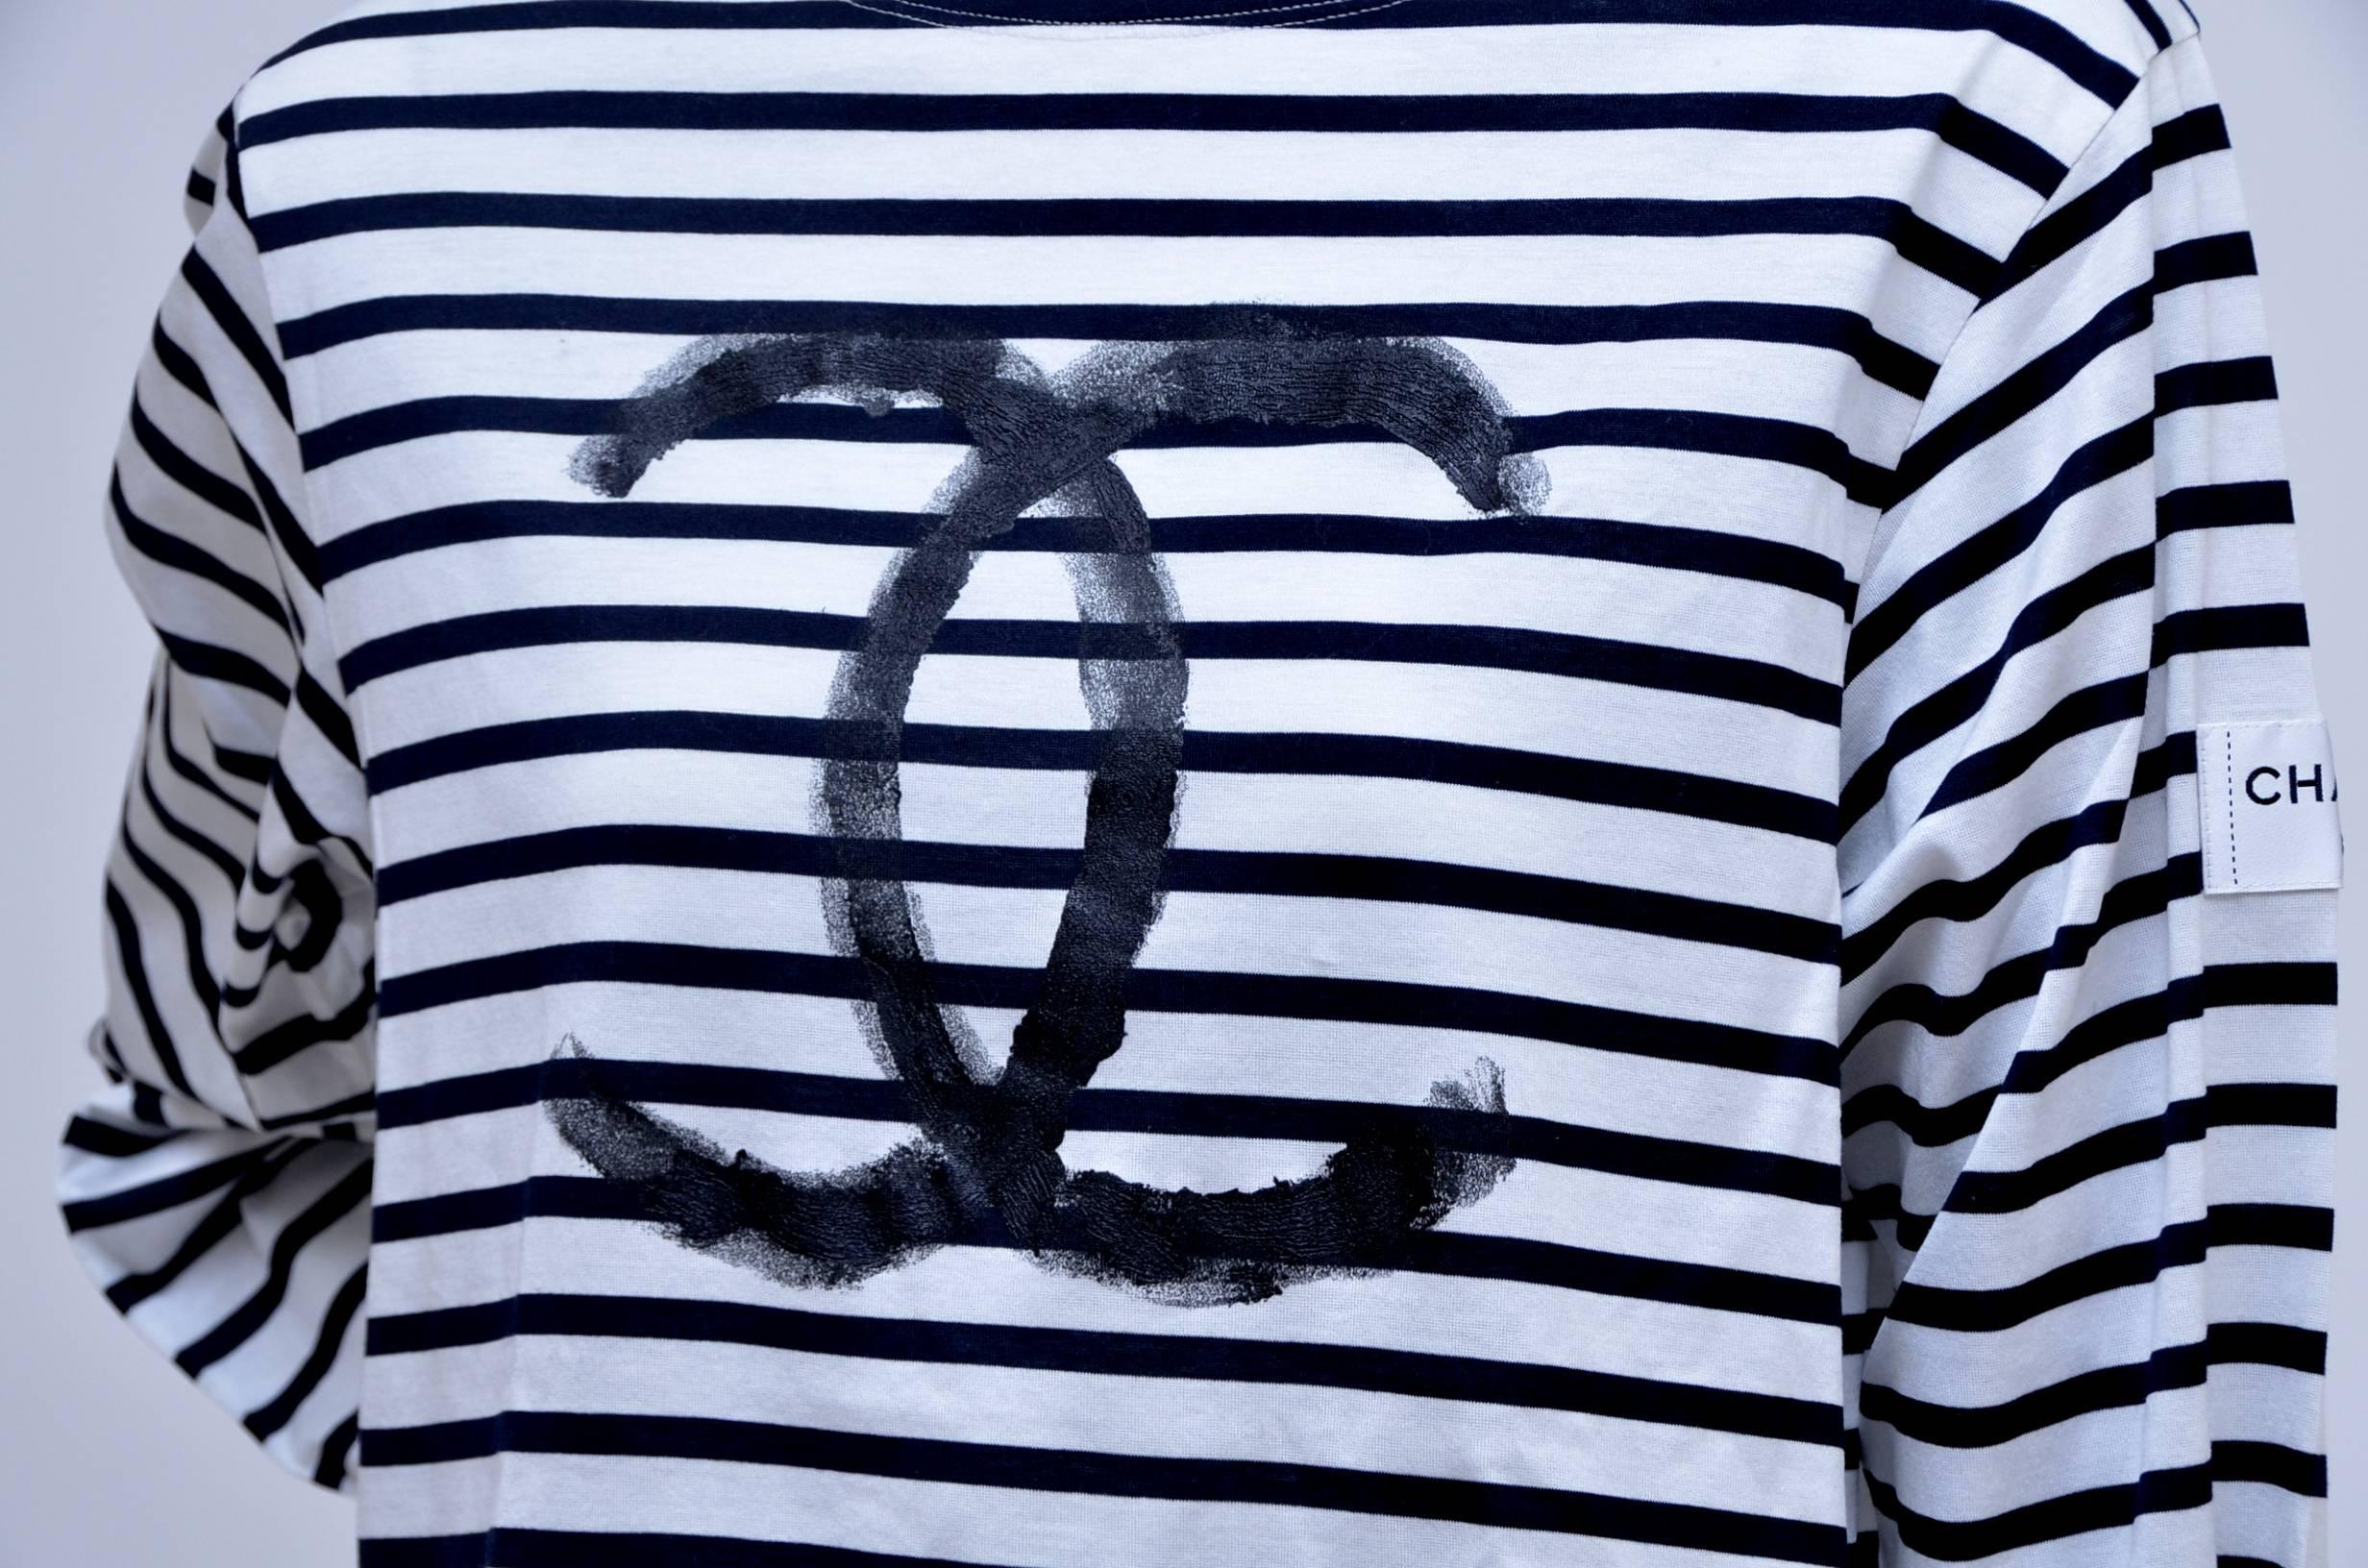 Chanel limited edition Christmas 2008 shirt.
New without tags.
Long sleeves.
Size S.Made in Italy.
Fabric 100% cotton.Long sleeve,white with black stripes and large CC in the front.Run little large....

Seen on super glam fashion icon Mira